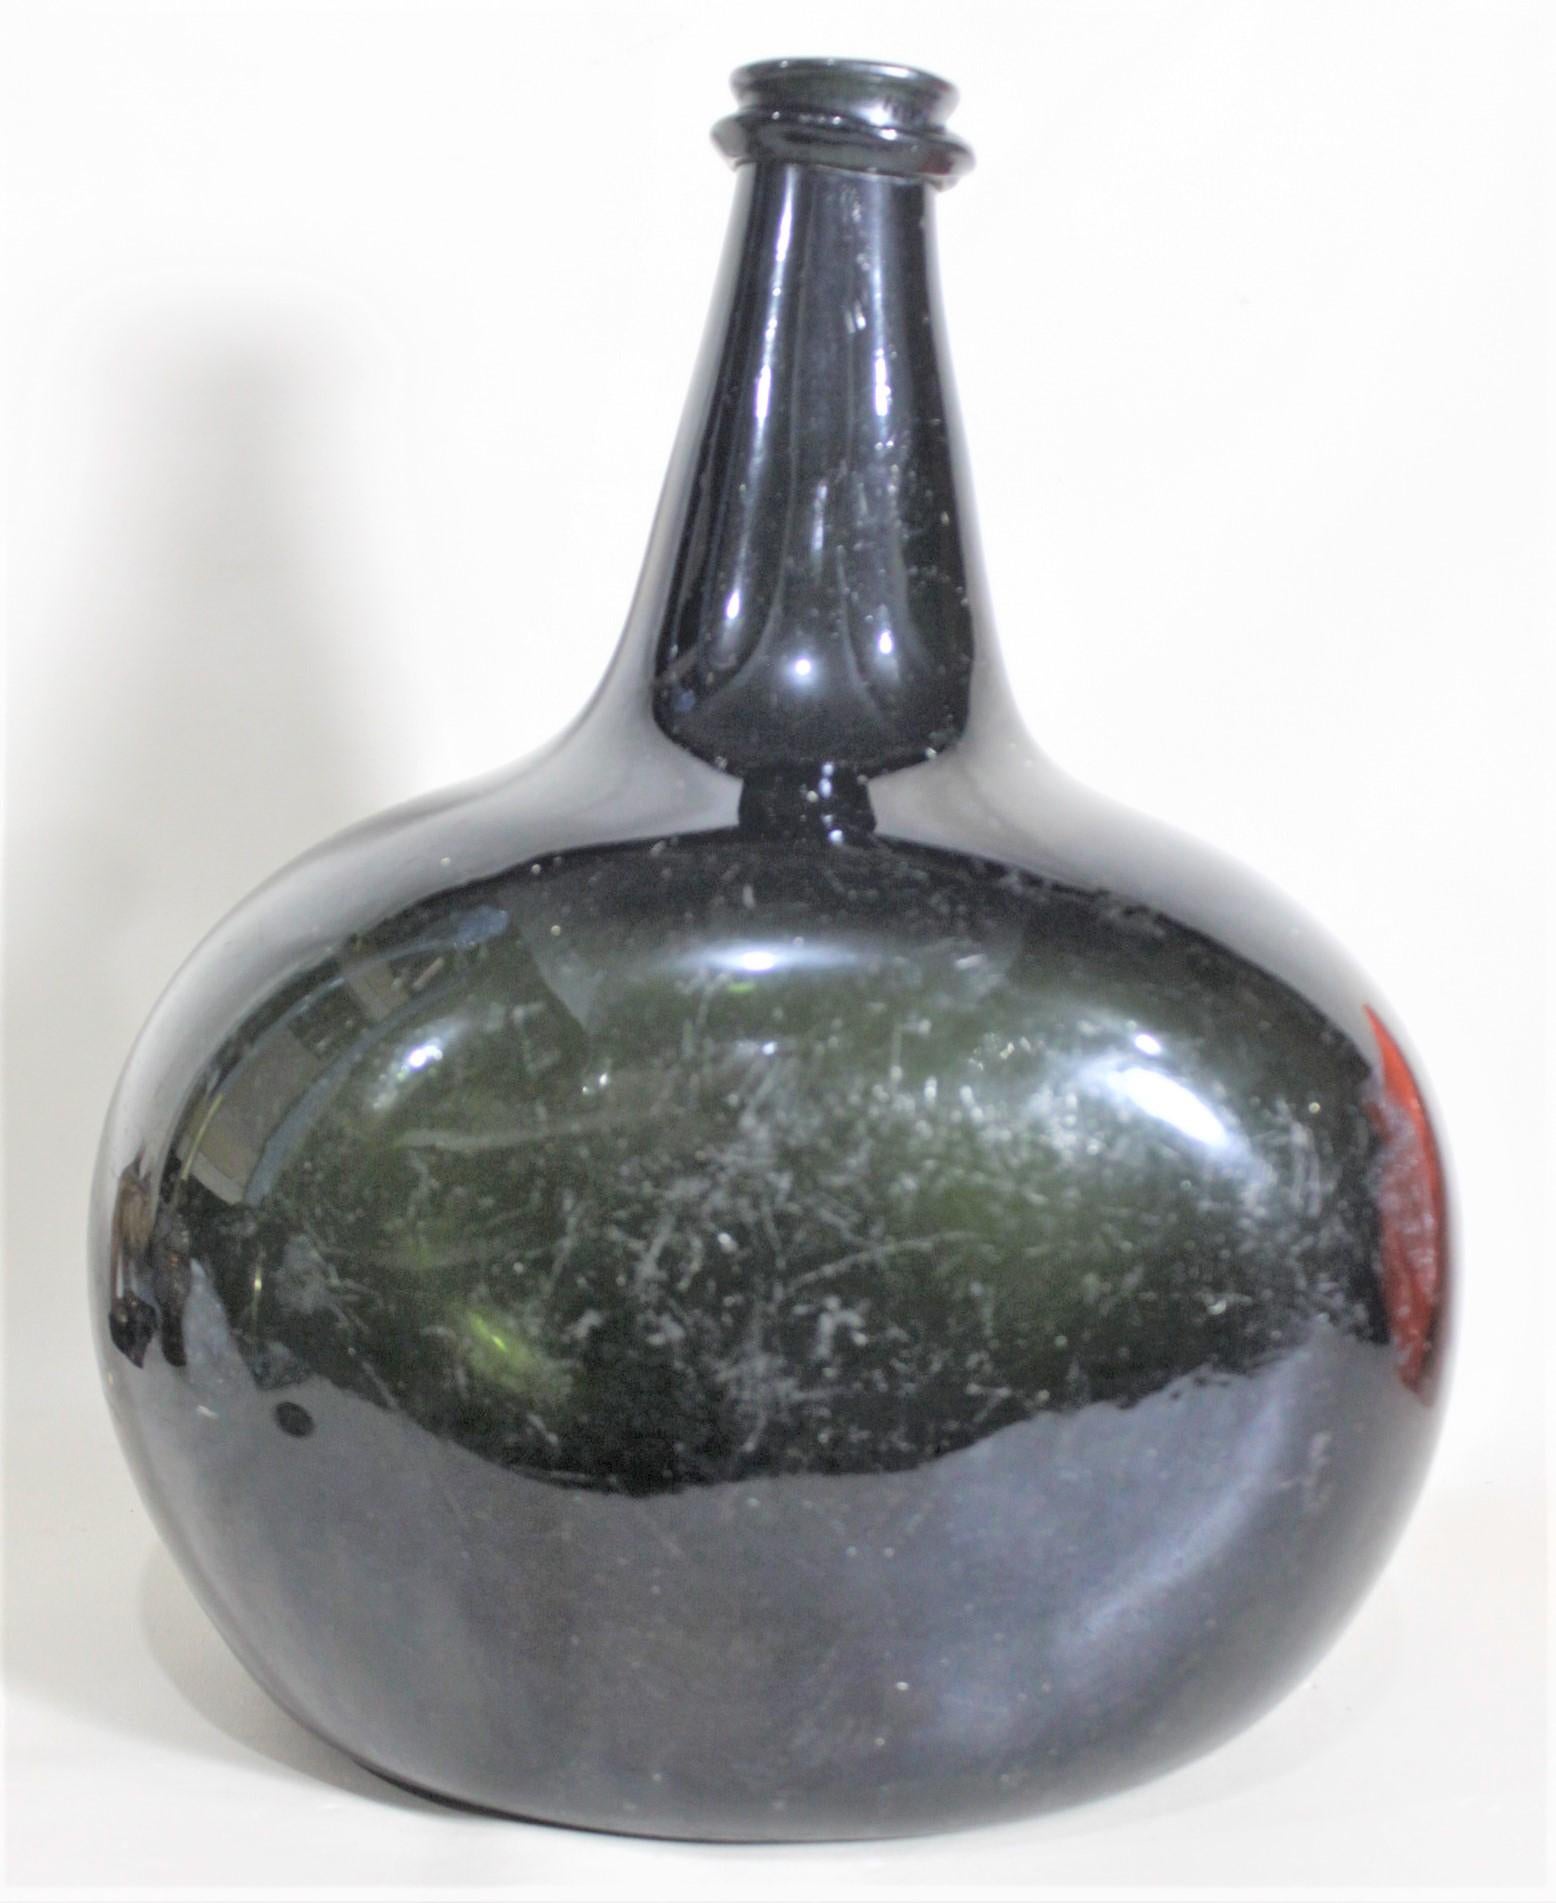 This very large and substantial antique wine bottle's exact origins are unknown, but it is presumed to be English or possibly Dutch and dating from the early 1700's. The bottle was hand blown and formed and uses a very thick deep olive green glass.